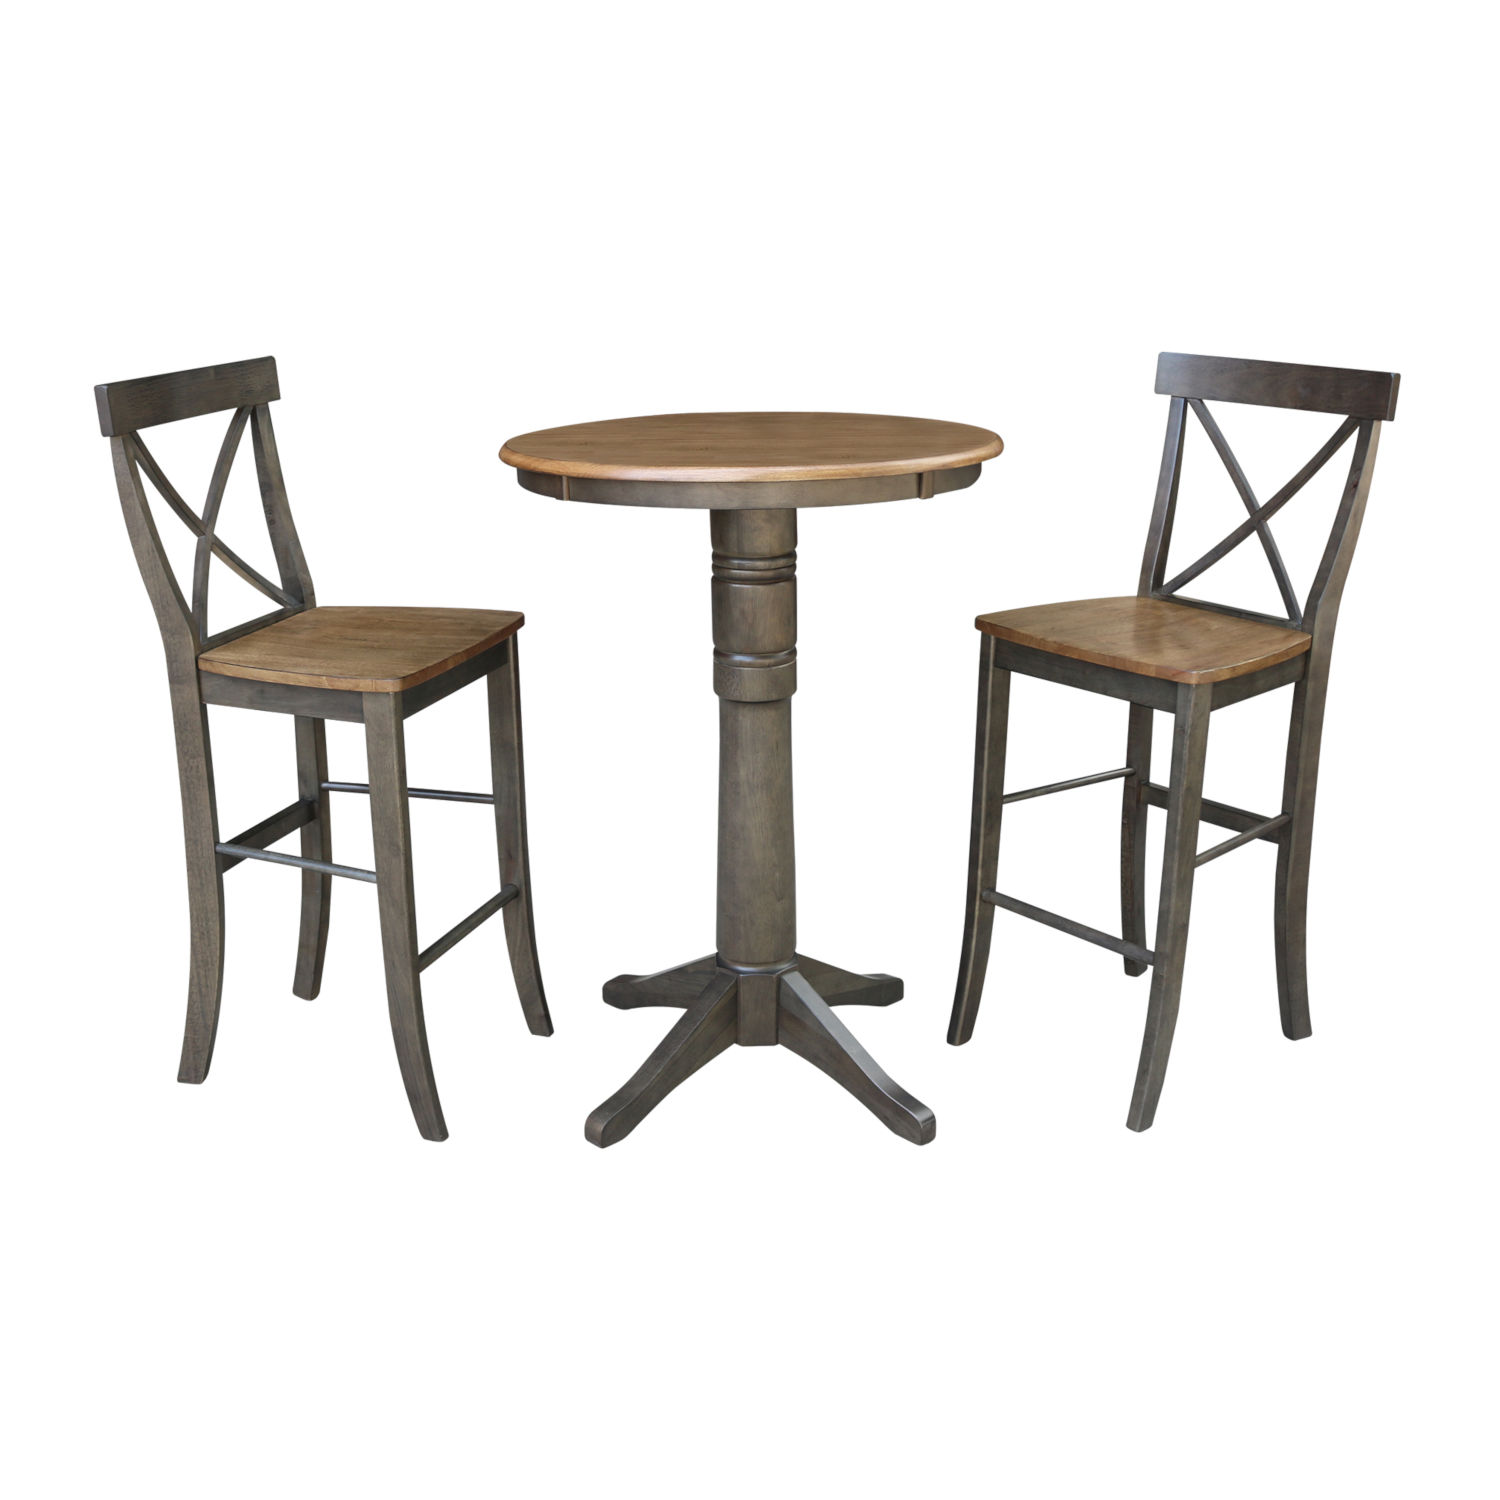 Hickory And Washed Coal 30-Inch Round Pedestal Bar Height Table With X-Back Bar Height Stools, Three-Piece